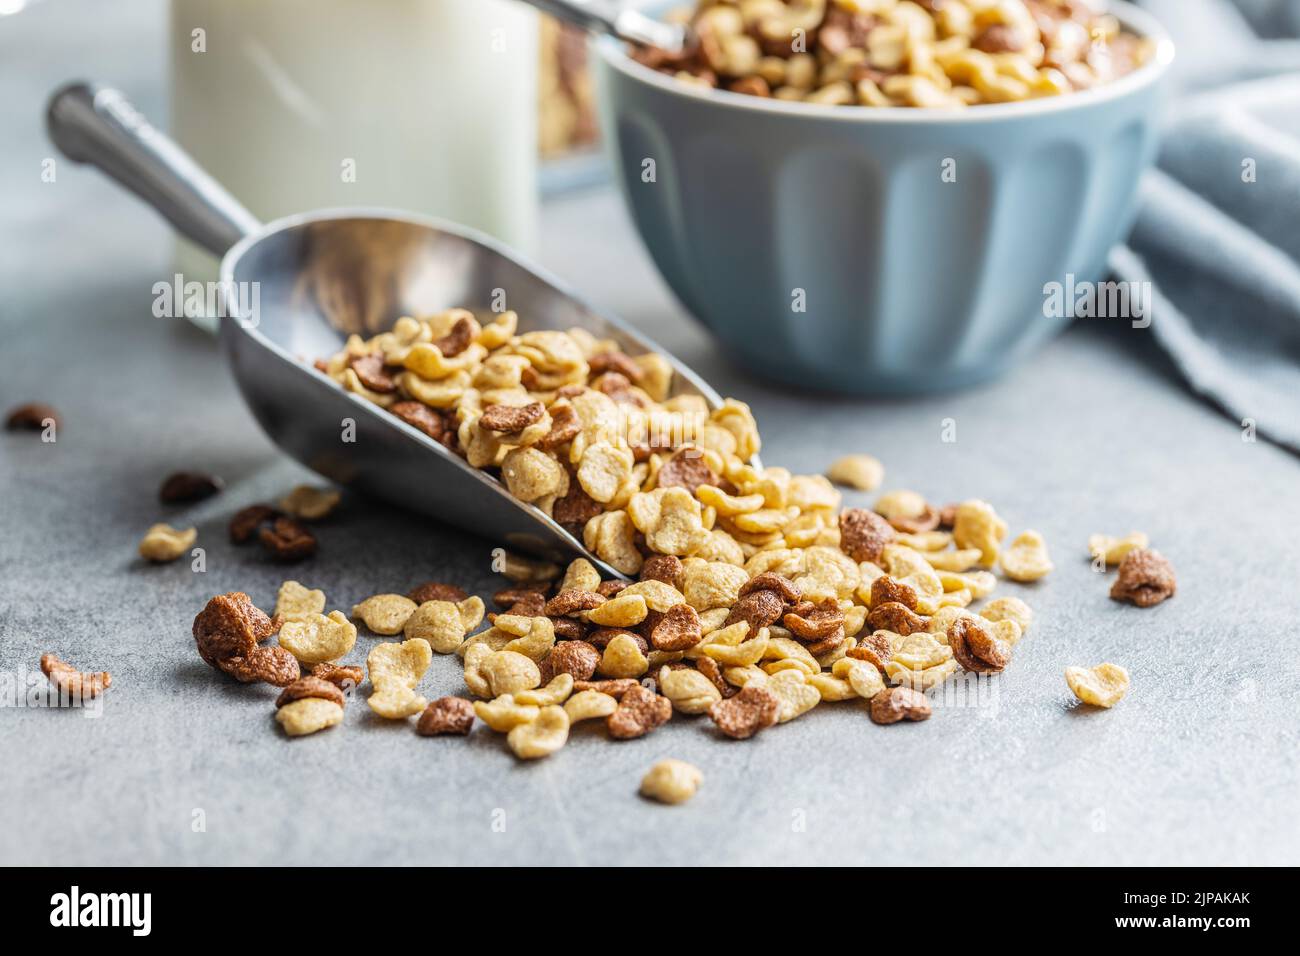 Breakfast cereal flakes in scoop on a kitchen table. Stock Photo